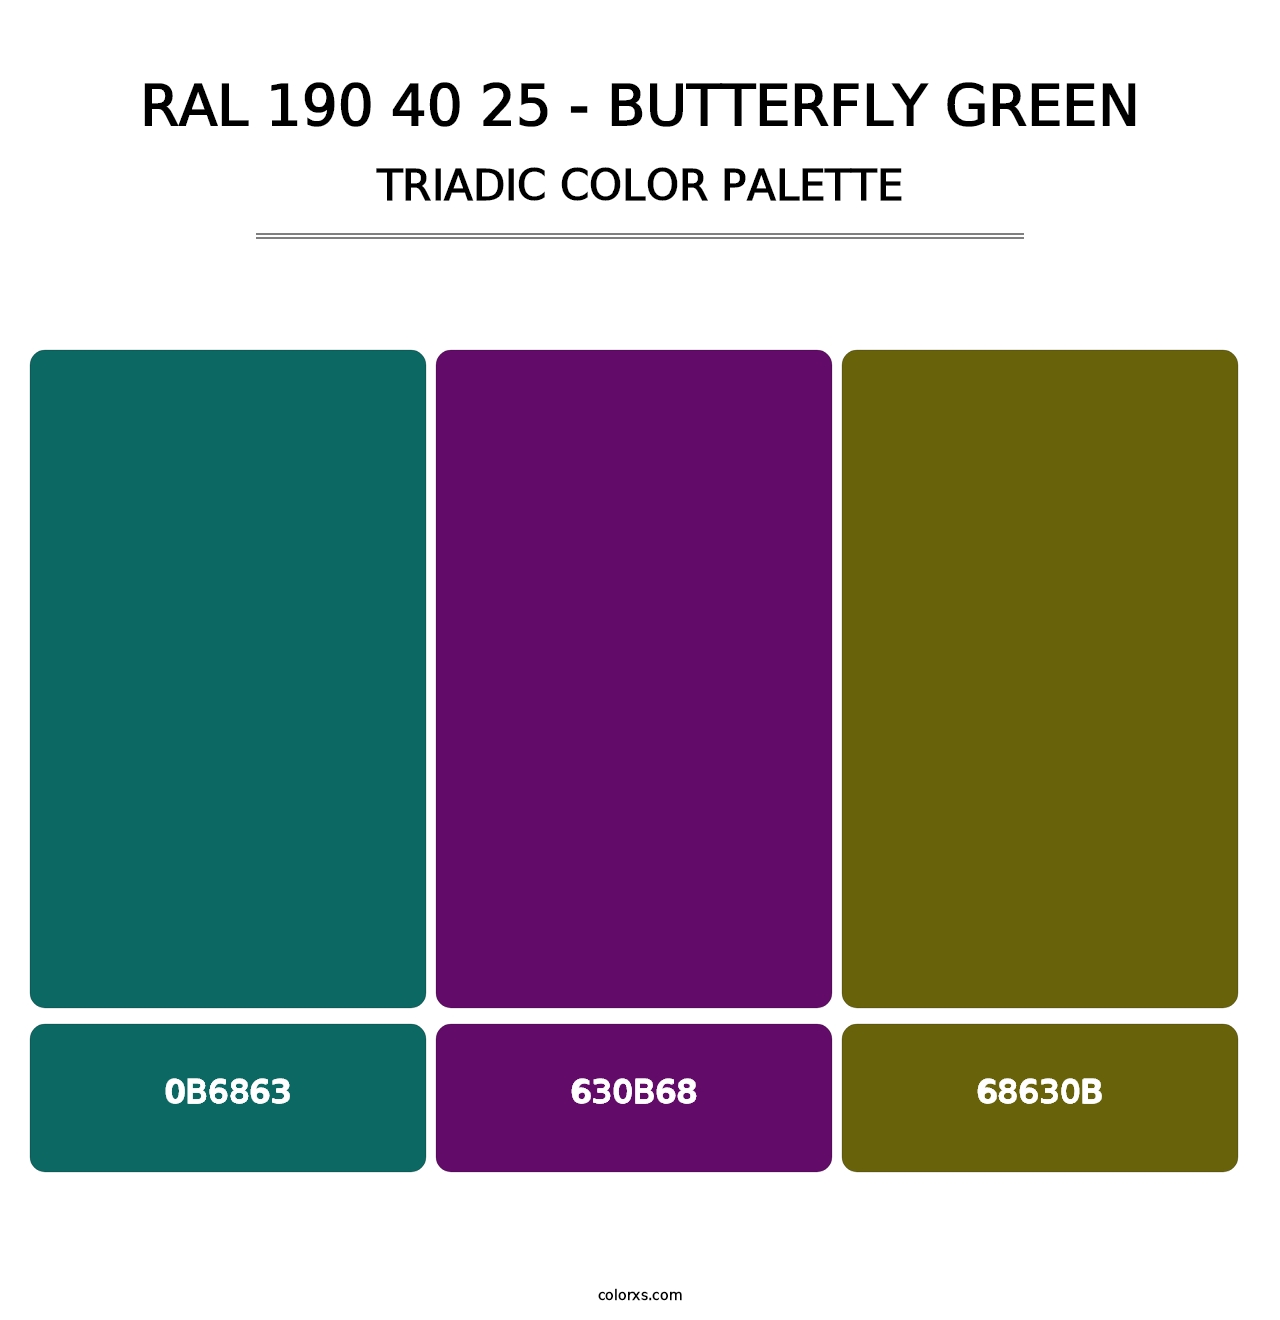 RAL 190 40 25 - Butterfly Green - Triadic Color Palette